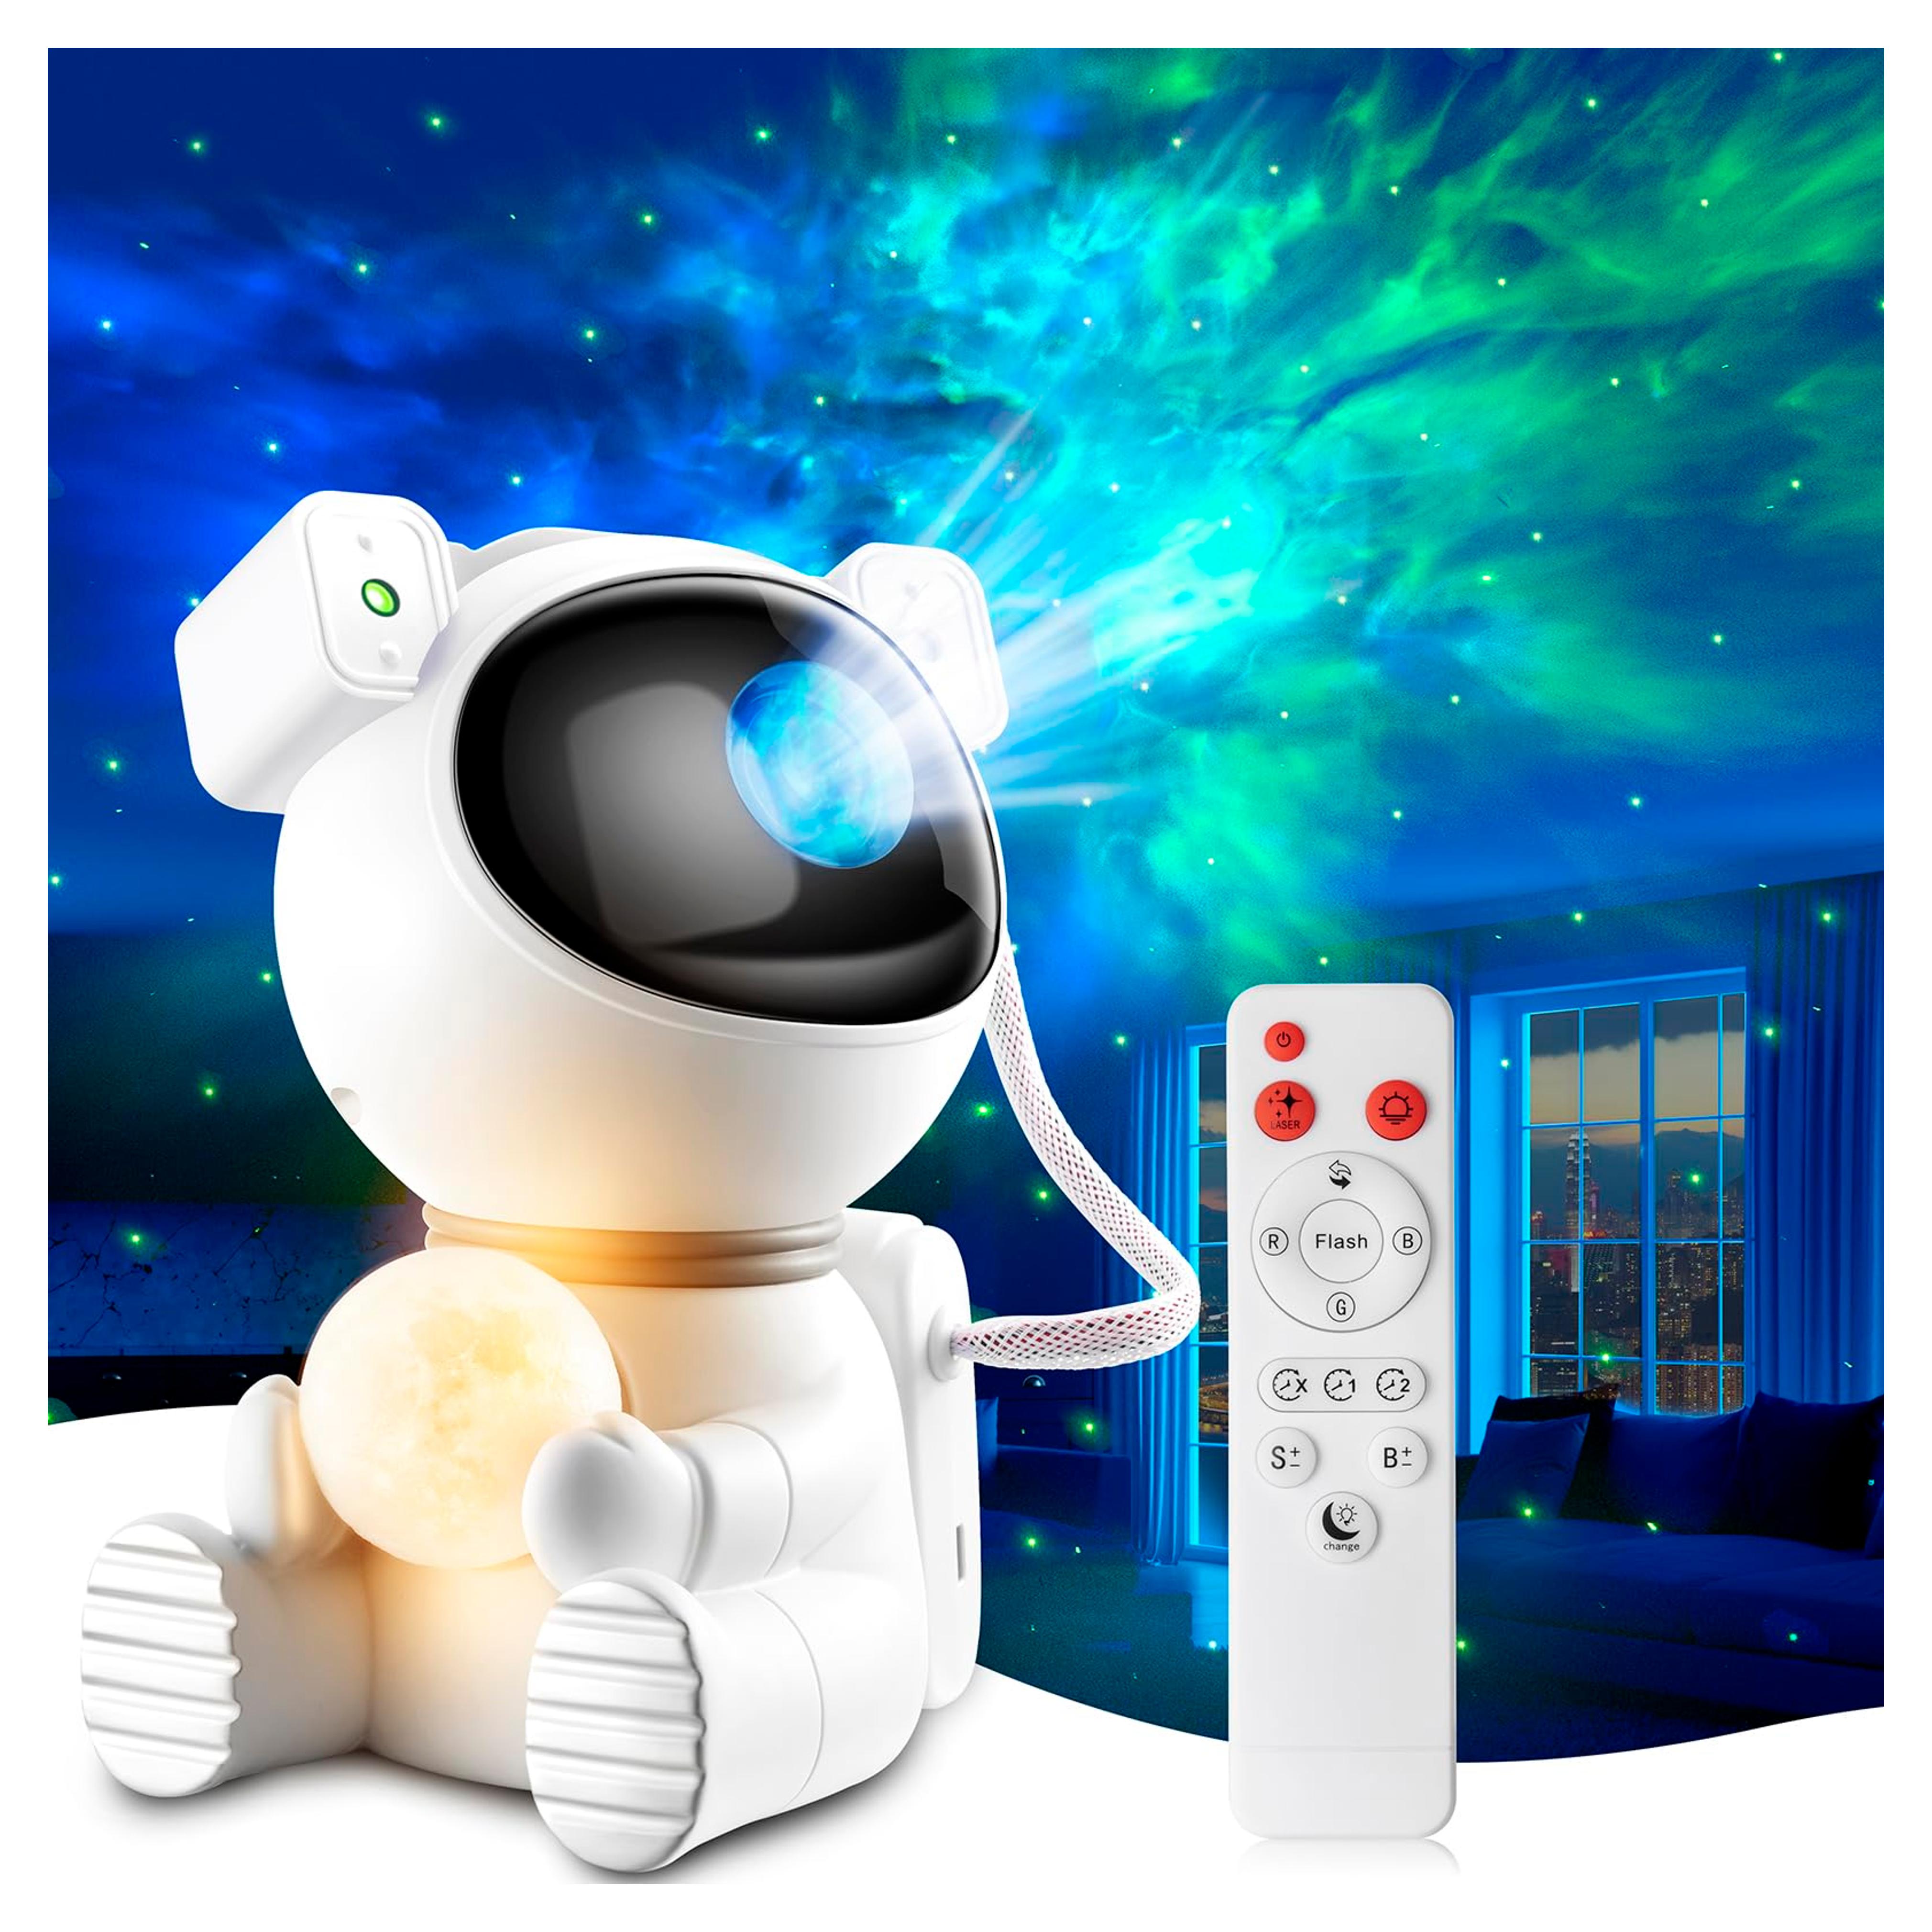 Astronaut Galaxy Projector Light, 2 in 1 Star Projector Light with Moon Lamp, Galaxy Night Light with 360° Adjustable & Remote Control, Gifts for Kids/Adults, Decor for Bedroom/Home/Party